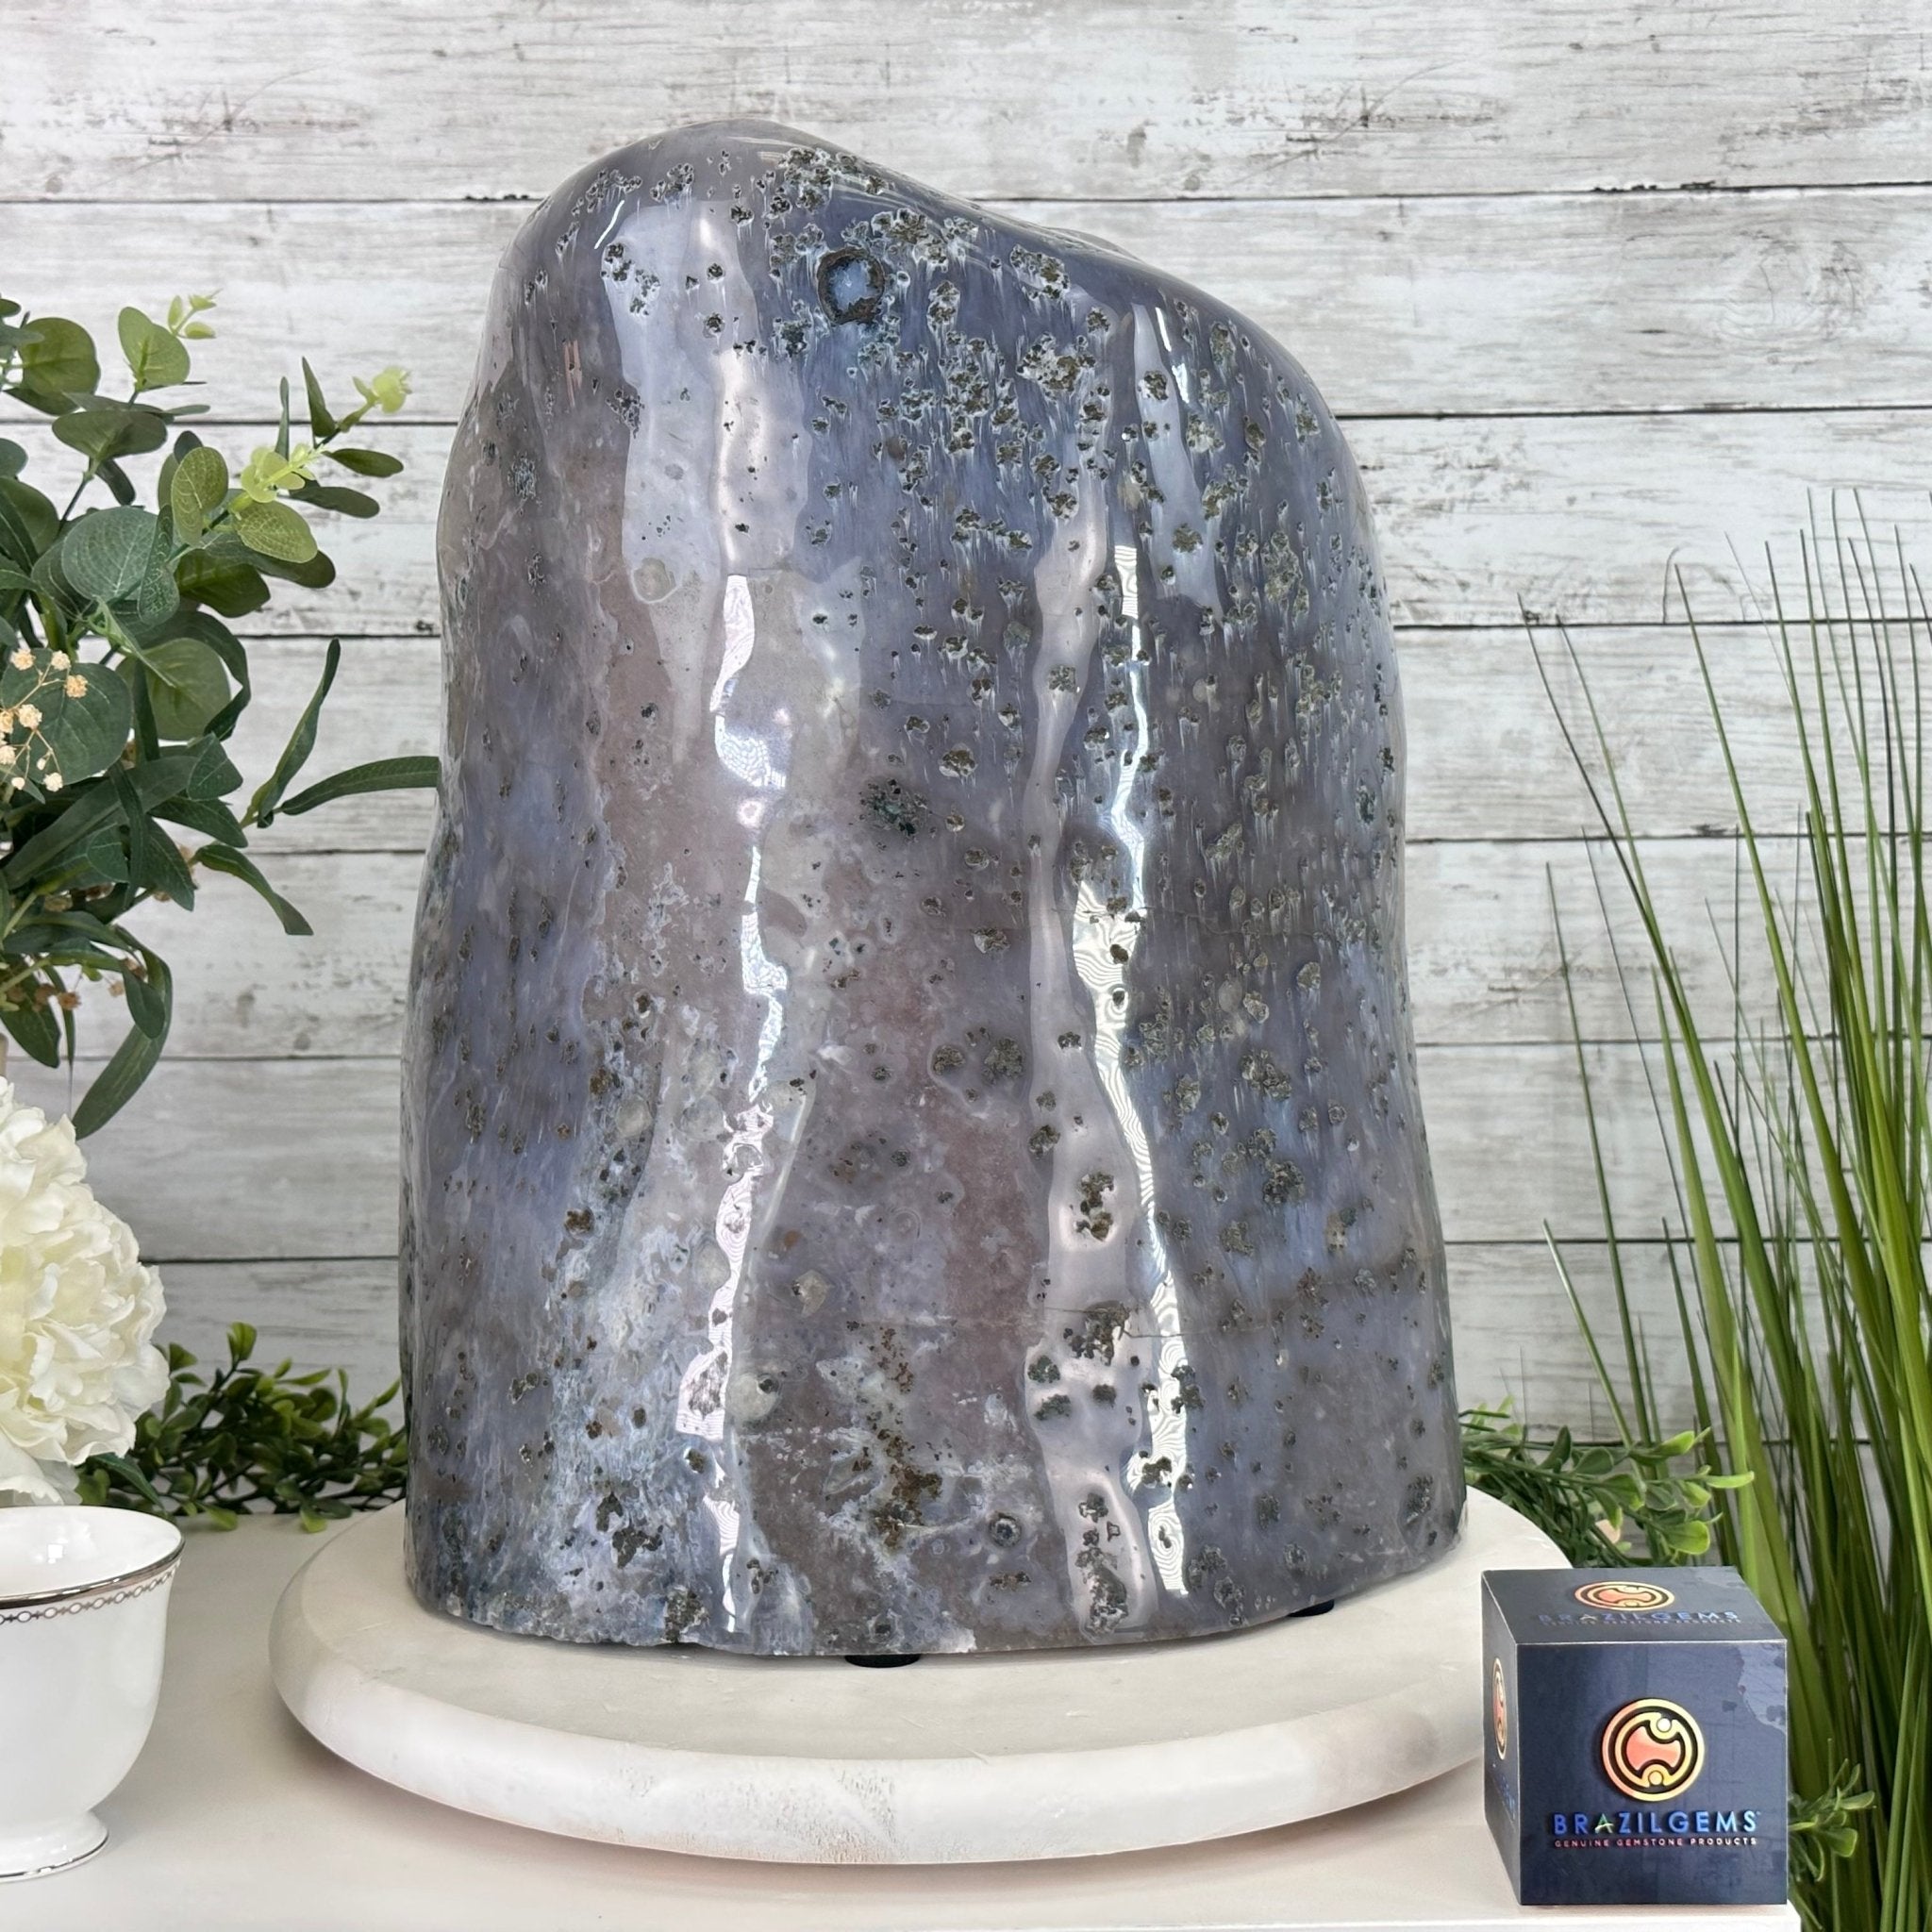 Extra Quality Polished Brazilian Amethyst Cathedral, 66.3 lbs & 16" tall Model #5602-0015 by Brazil Gems - Brazil GemsBrazil GemsExtra Quality Polished Brazilian Amethyst Cathedral, 66.3 lbs & 16" tall Model #5602-0015 by Brazil GemsPolished Cathedrals5602-0015